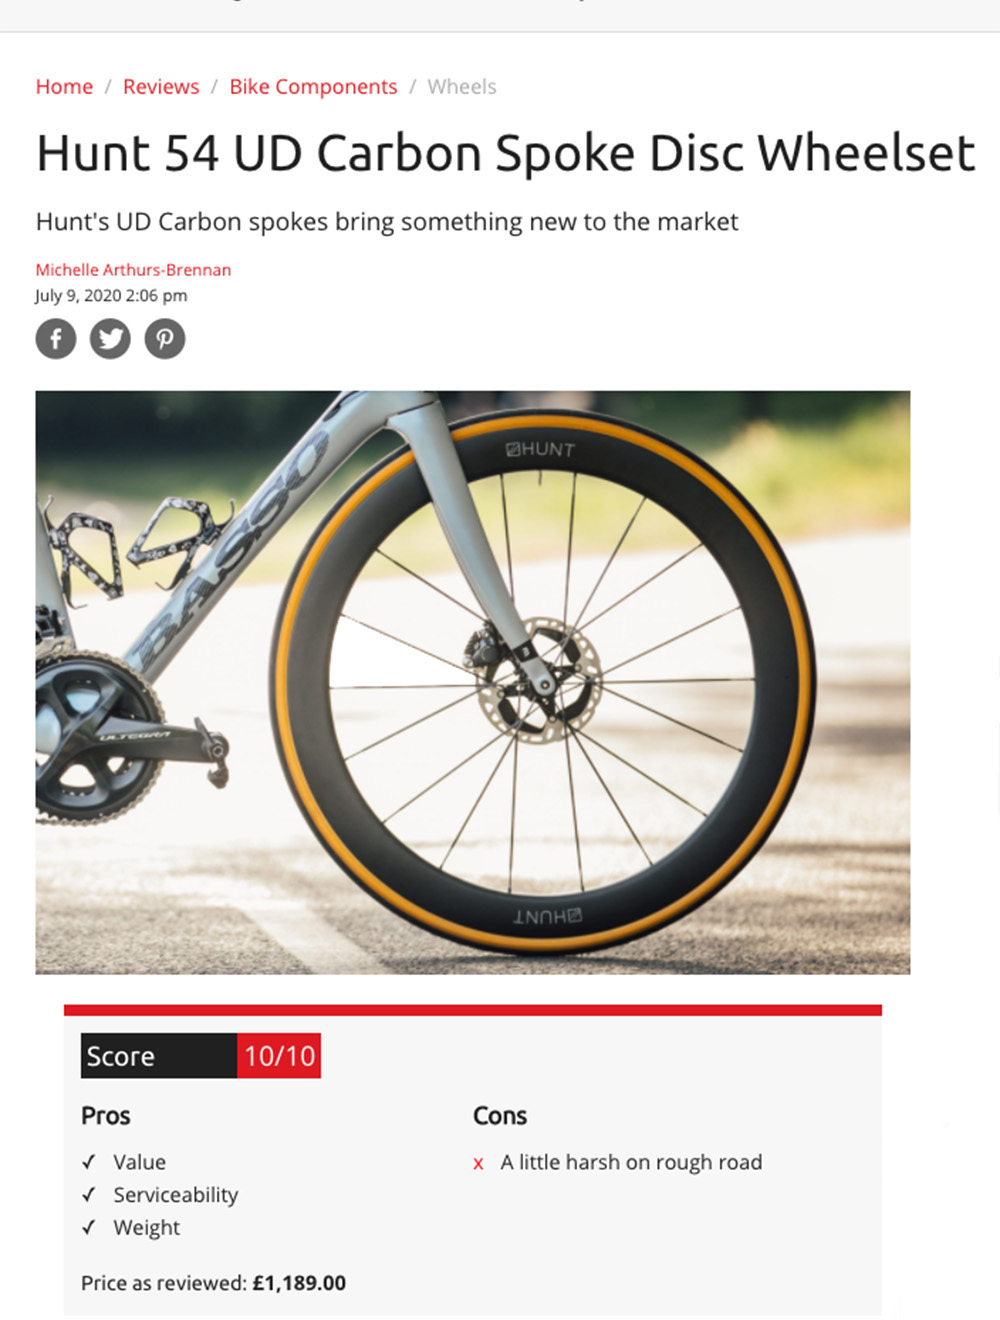 Cycling Weekly Review - HUNT 54 Carbon Spoke Disc Wheelset